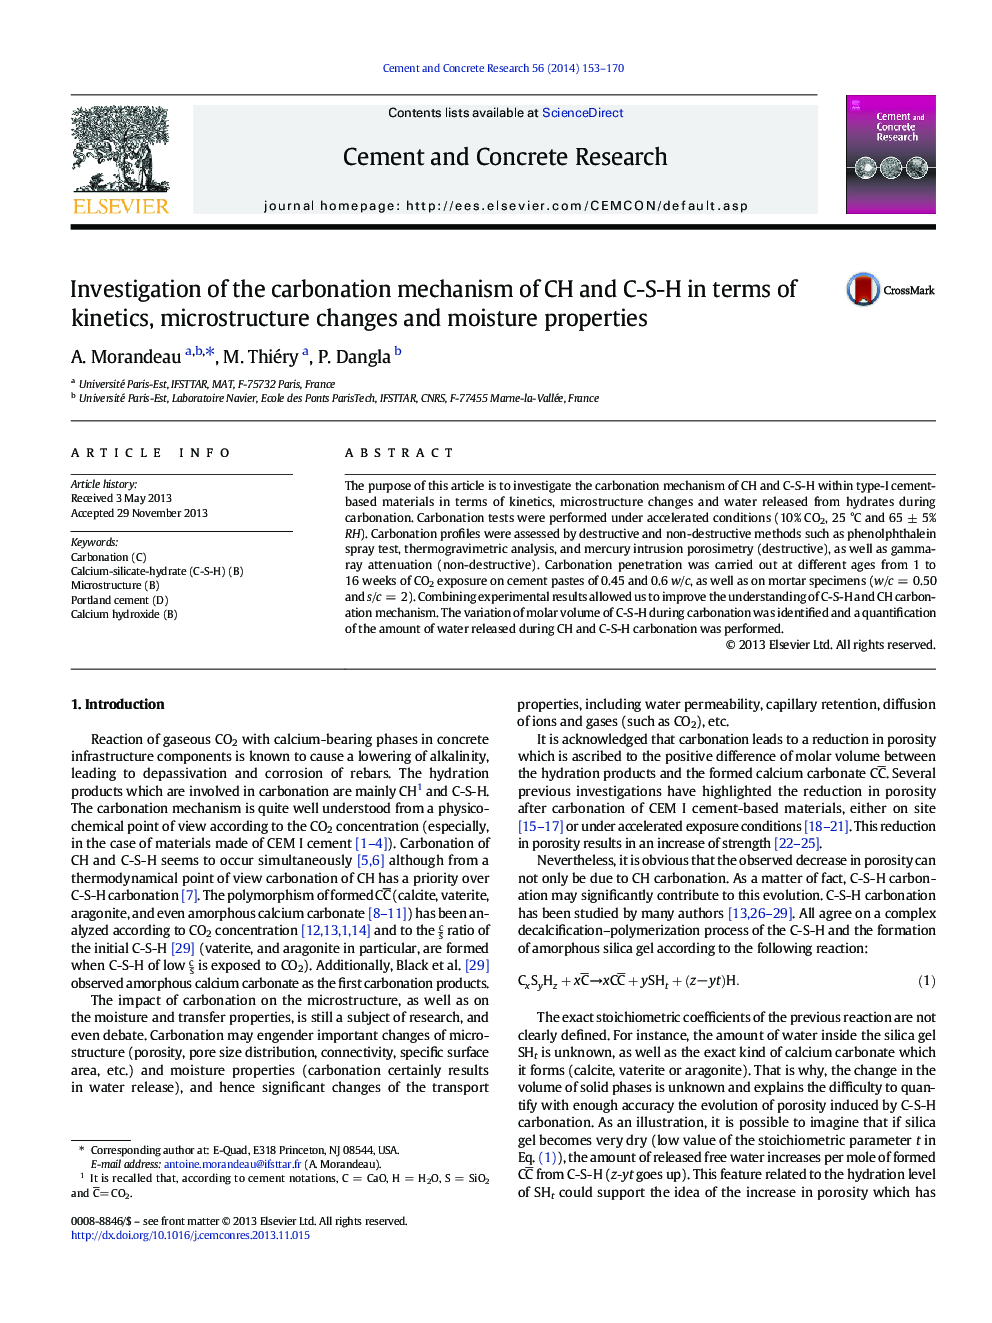 Investigation of the carbonation mechanism of CH and C-S-H in terms of kinetics, microstructure changes and moisture properties